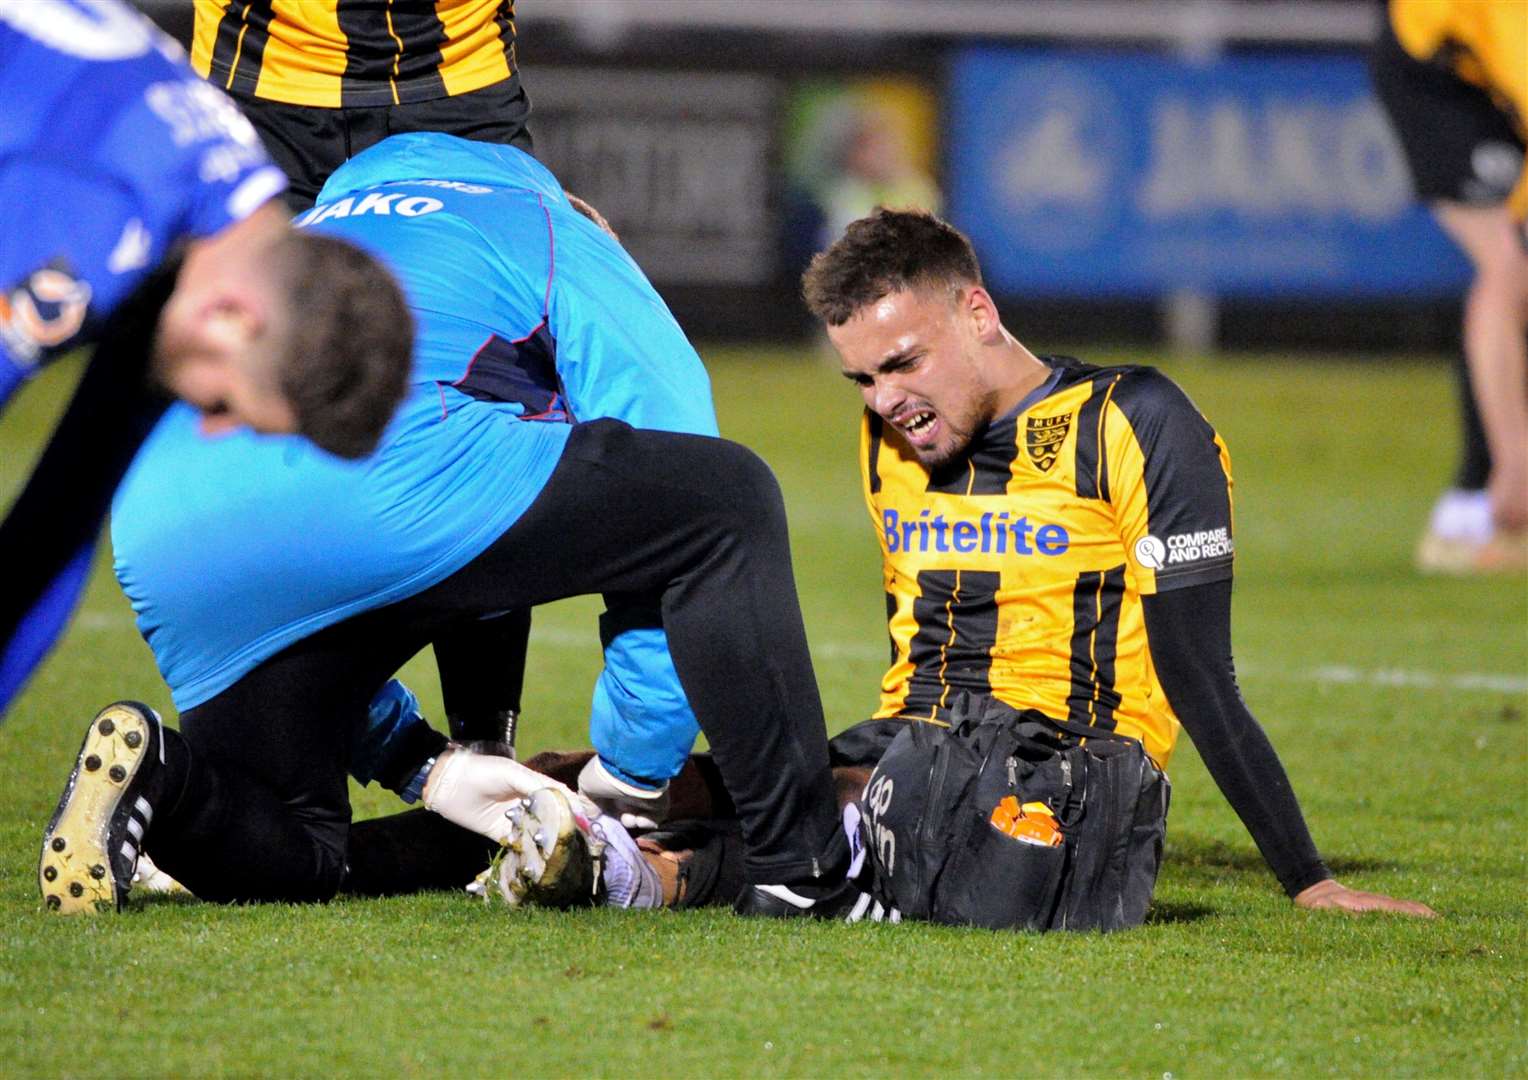 Michael Phillips receives treatment at Eastleigh Picture: Steve Terrell